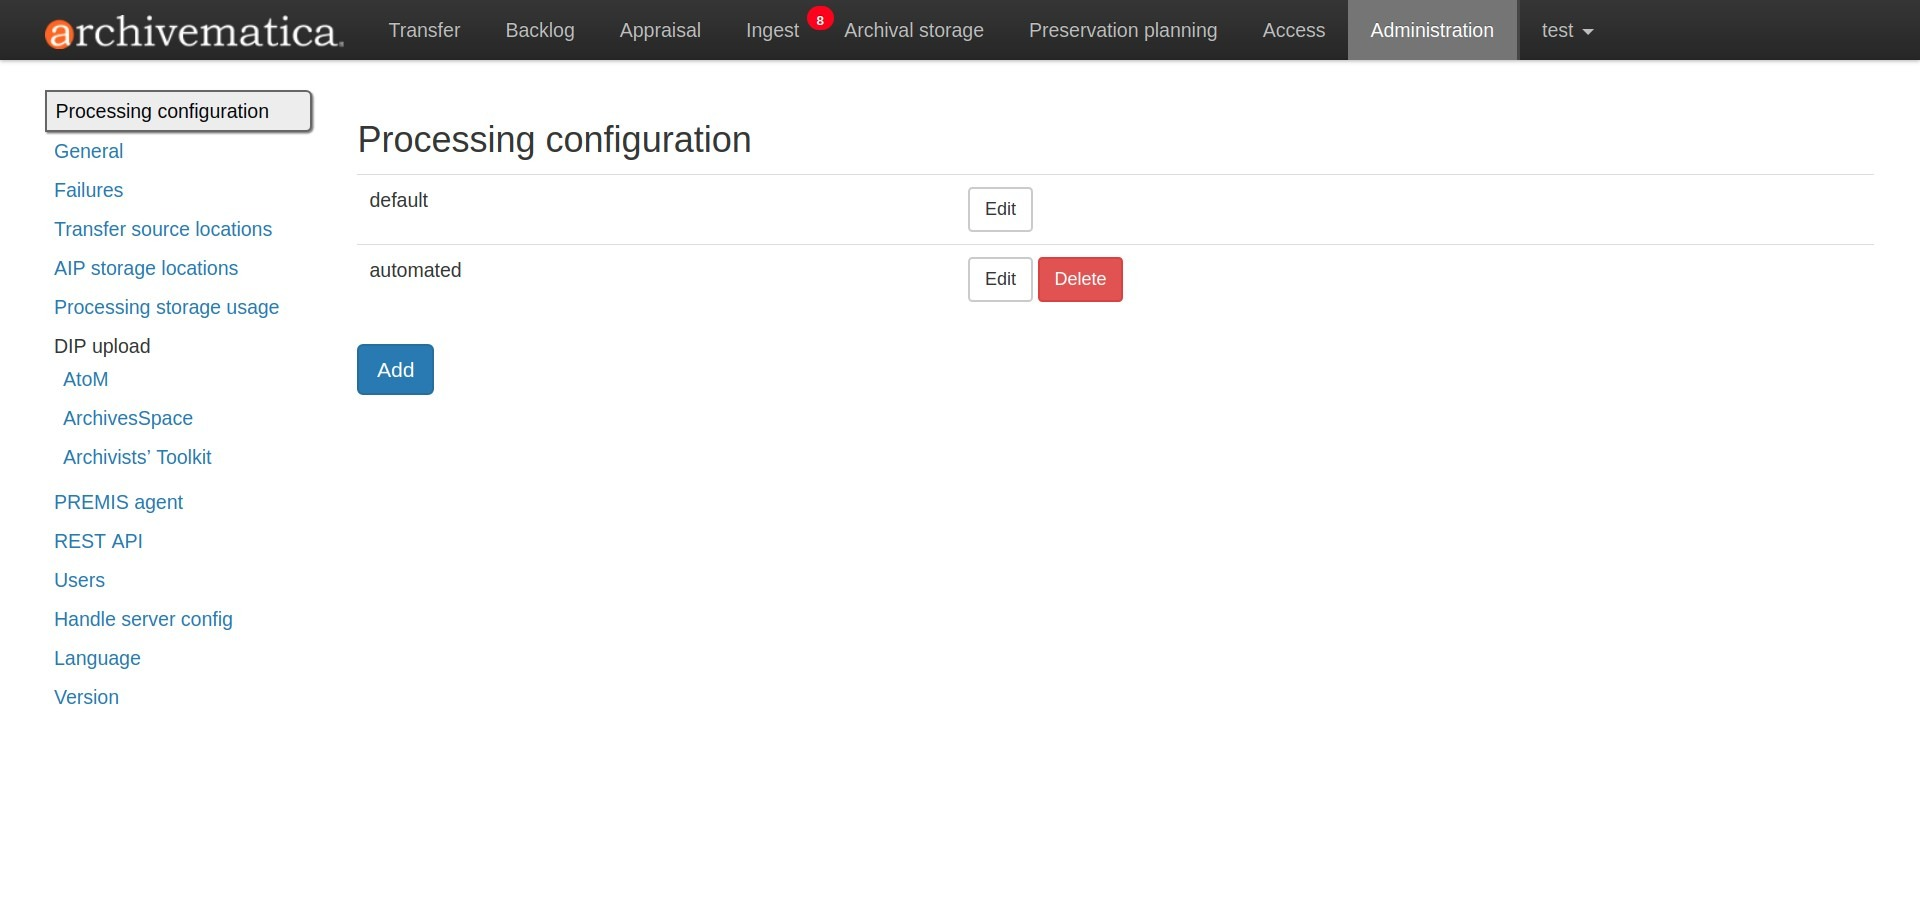 Image showing the Processing configuration page in the dashboard